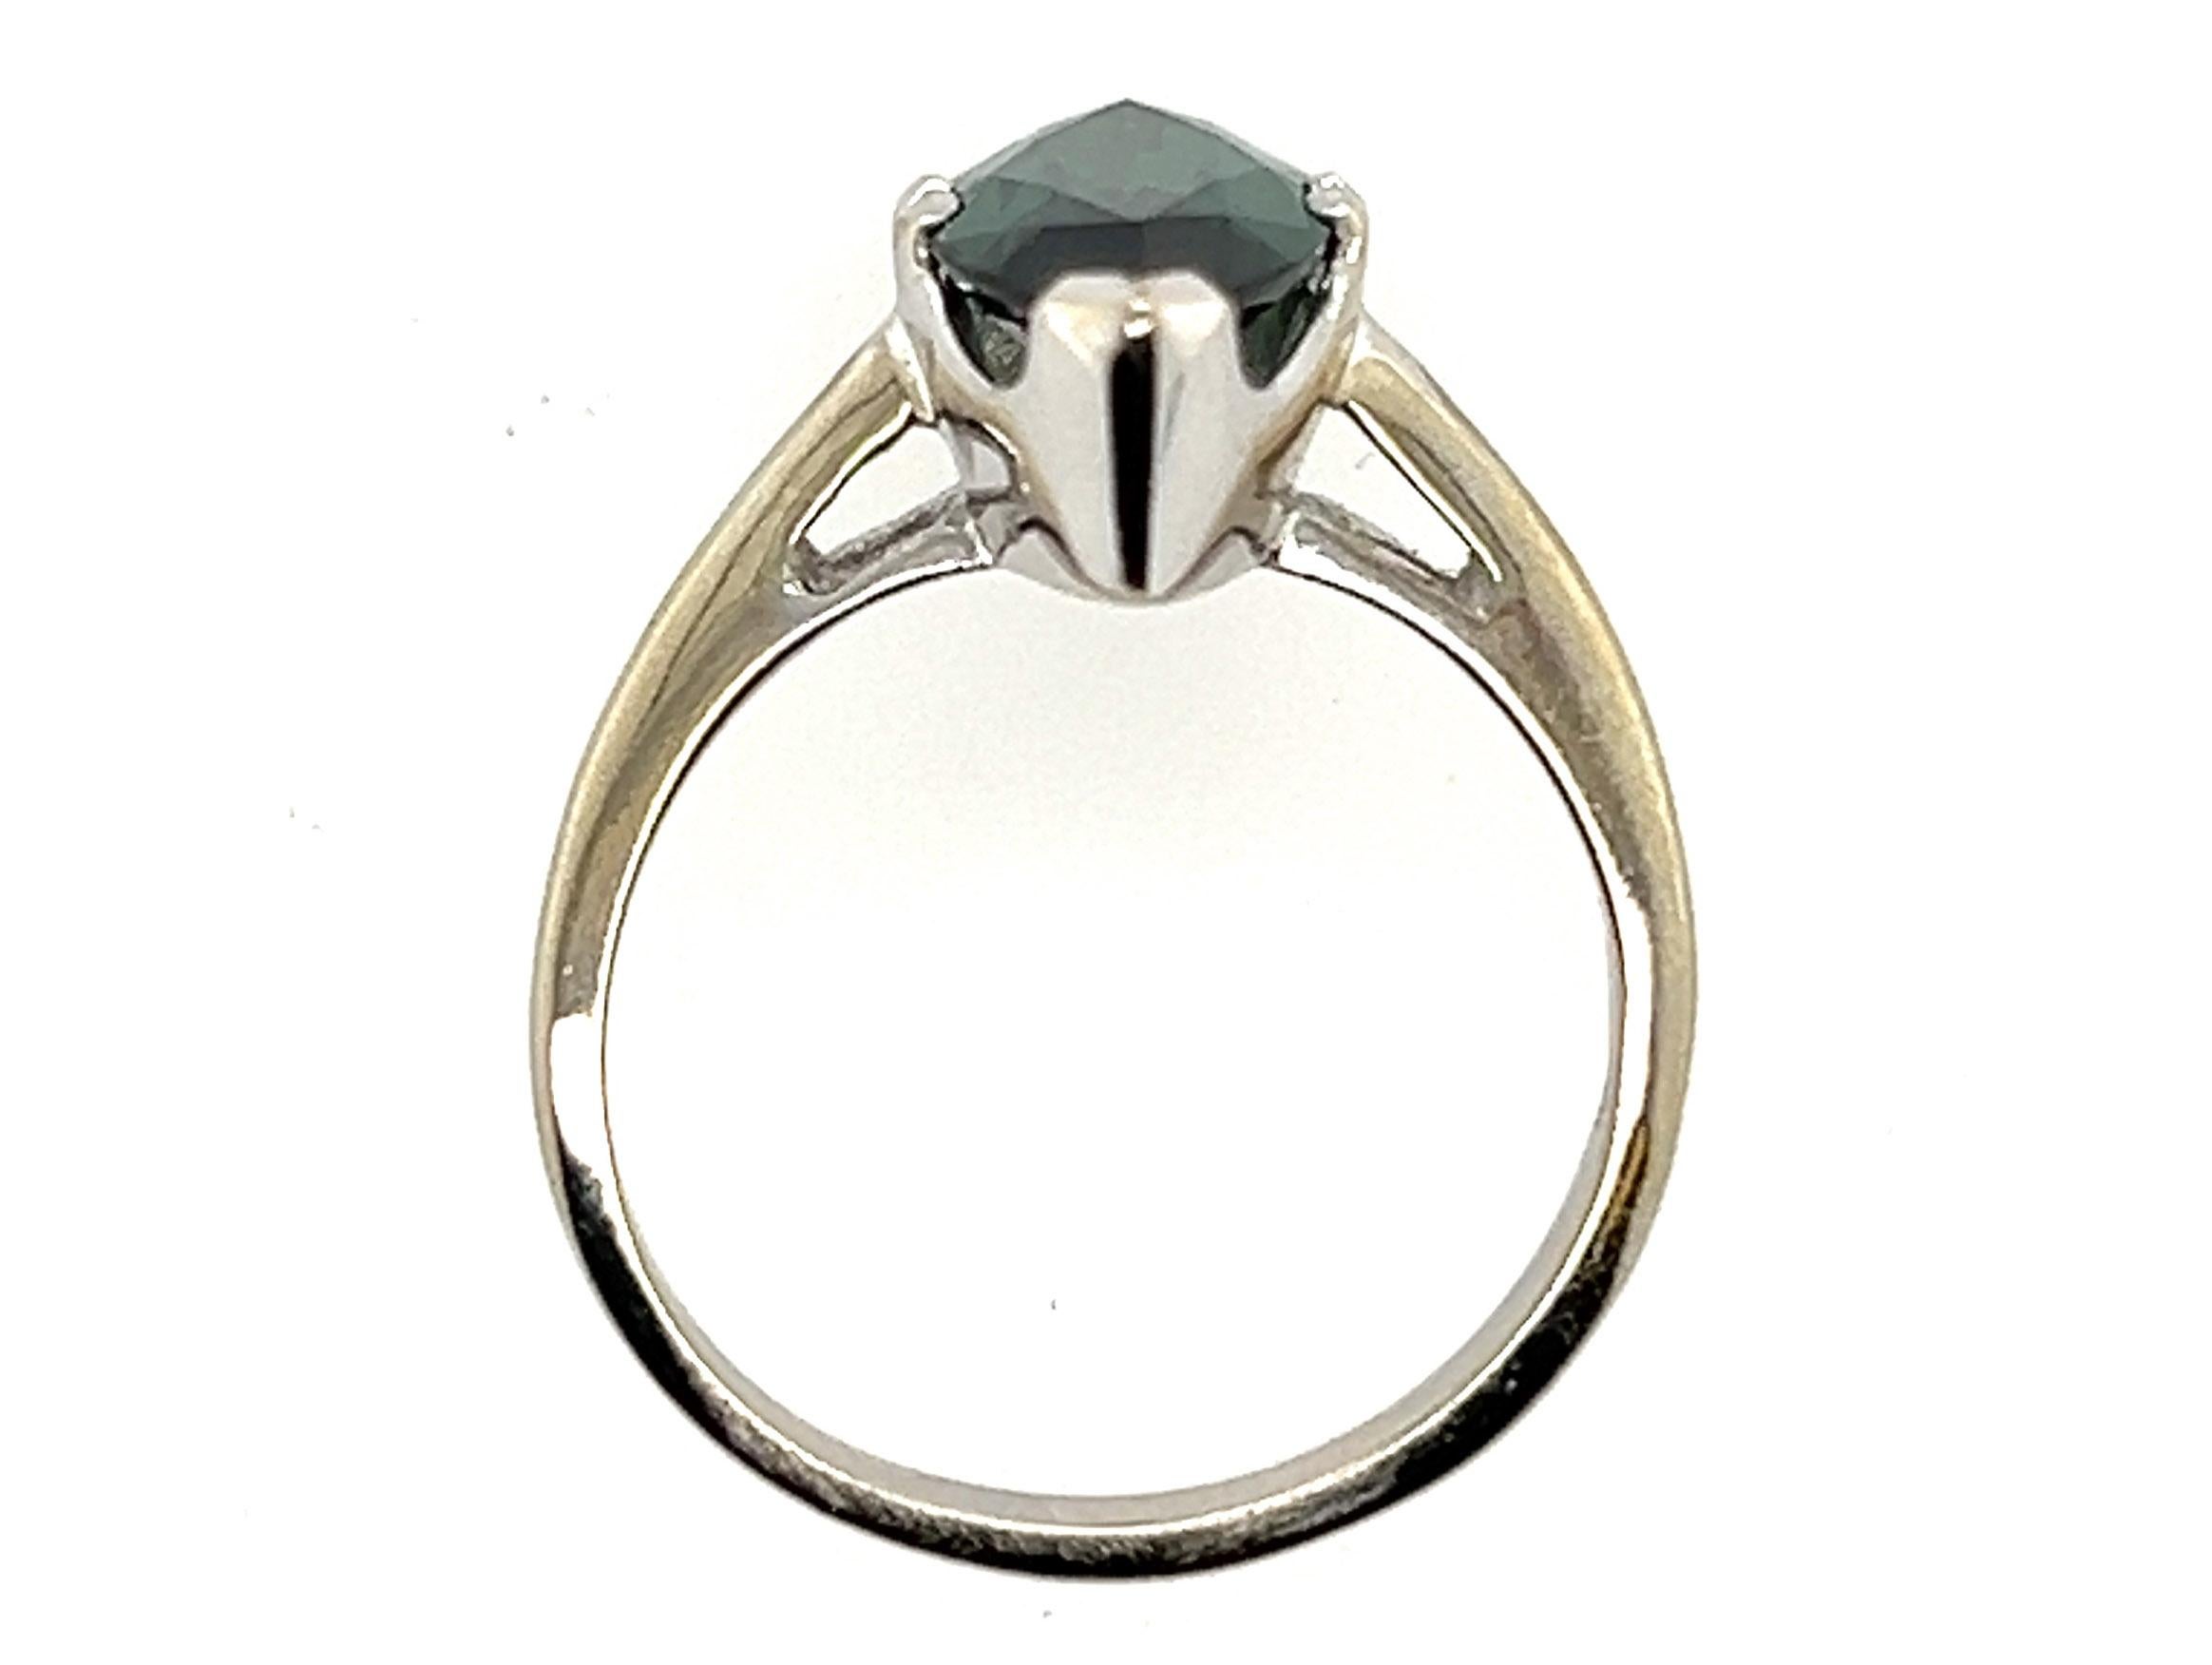 GIA Certified 2.75ct Bluish Green Spinel Marquise Ring 18K Brand New


Featuring a Stunning 2.75ct GIA Certified Laboratory Grown Spinel Marquise Cut Center

Eye Catching Bluish Green 

Modern Birthstone for August 

Spinel is GIA Certified

GIA is